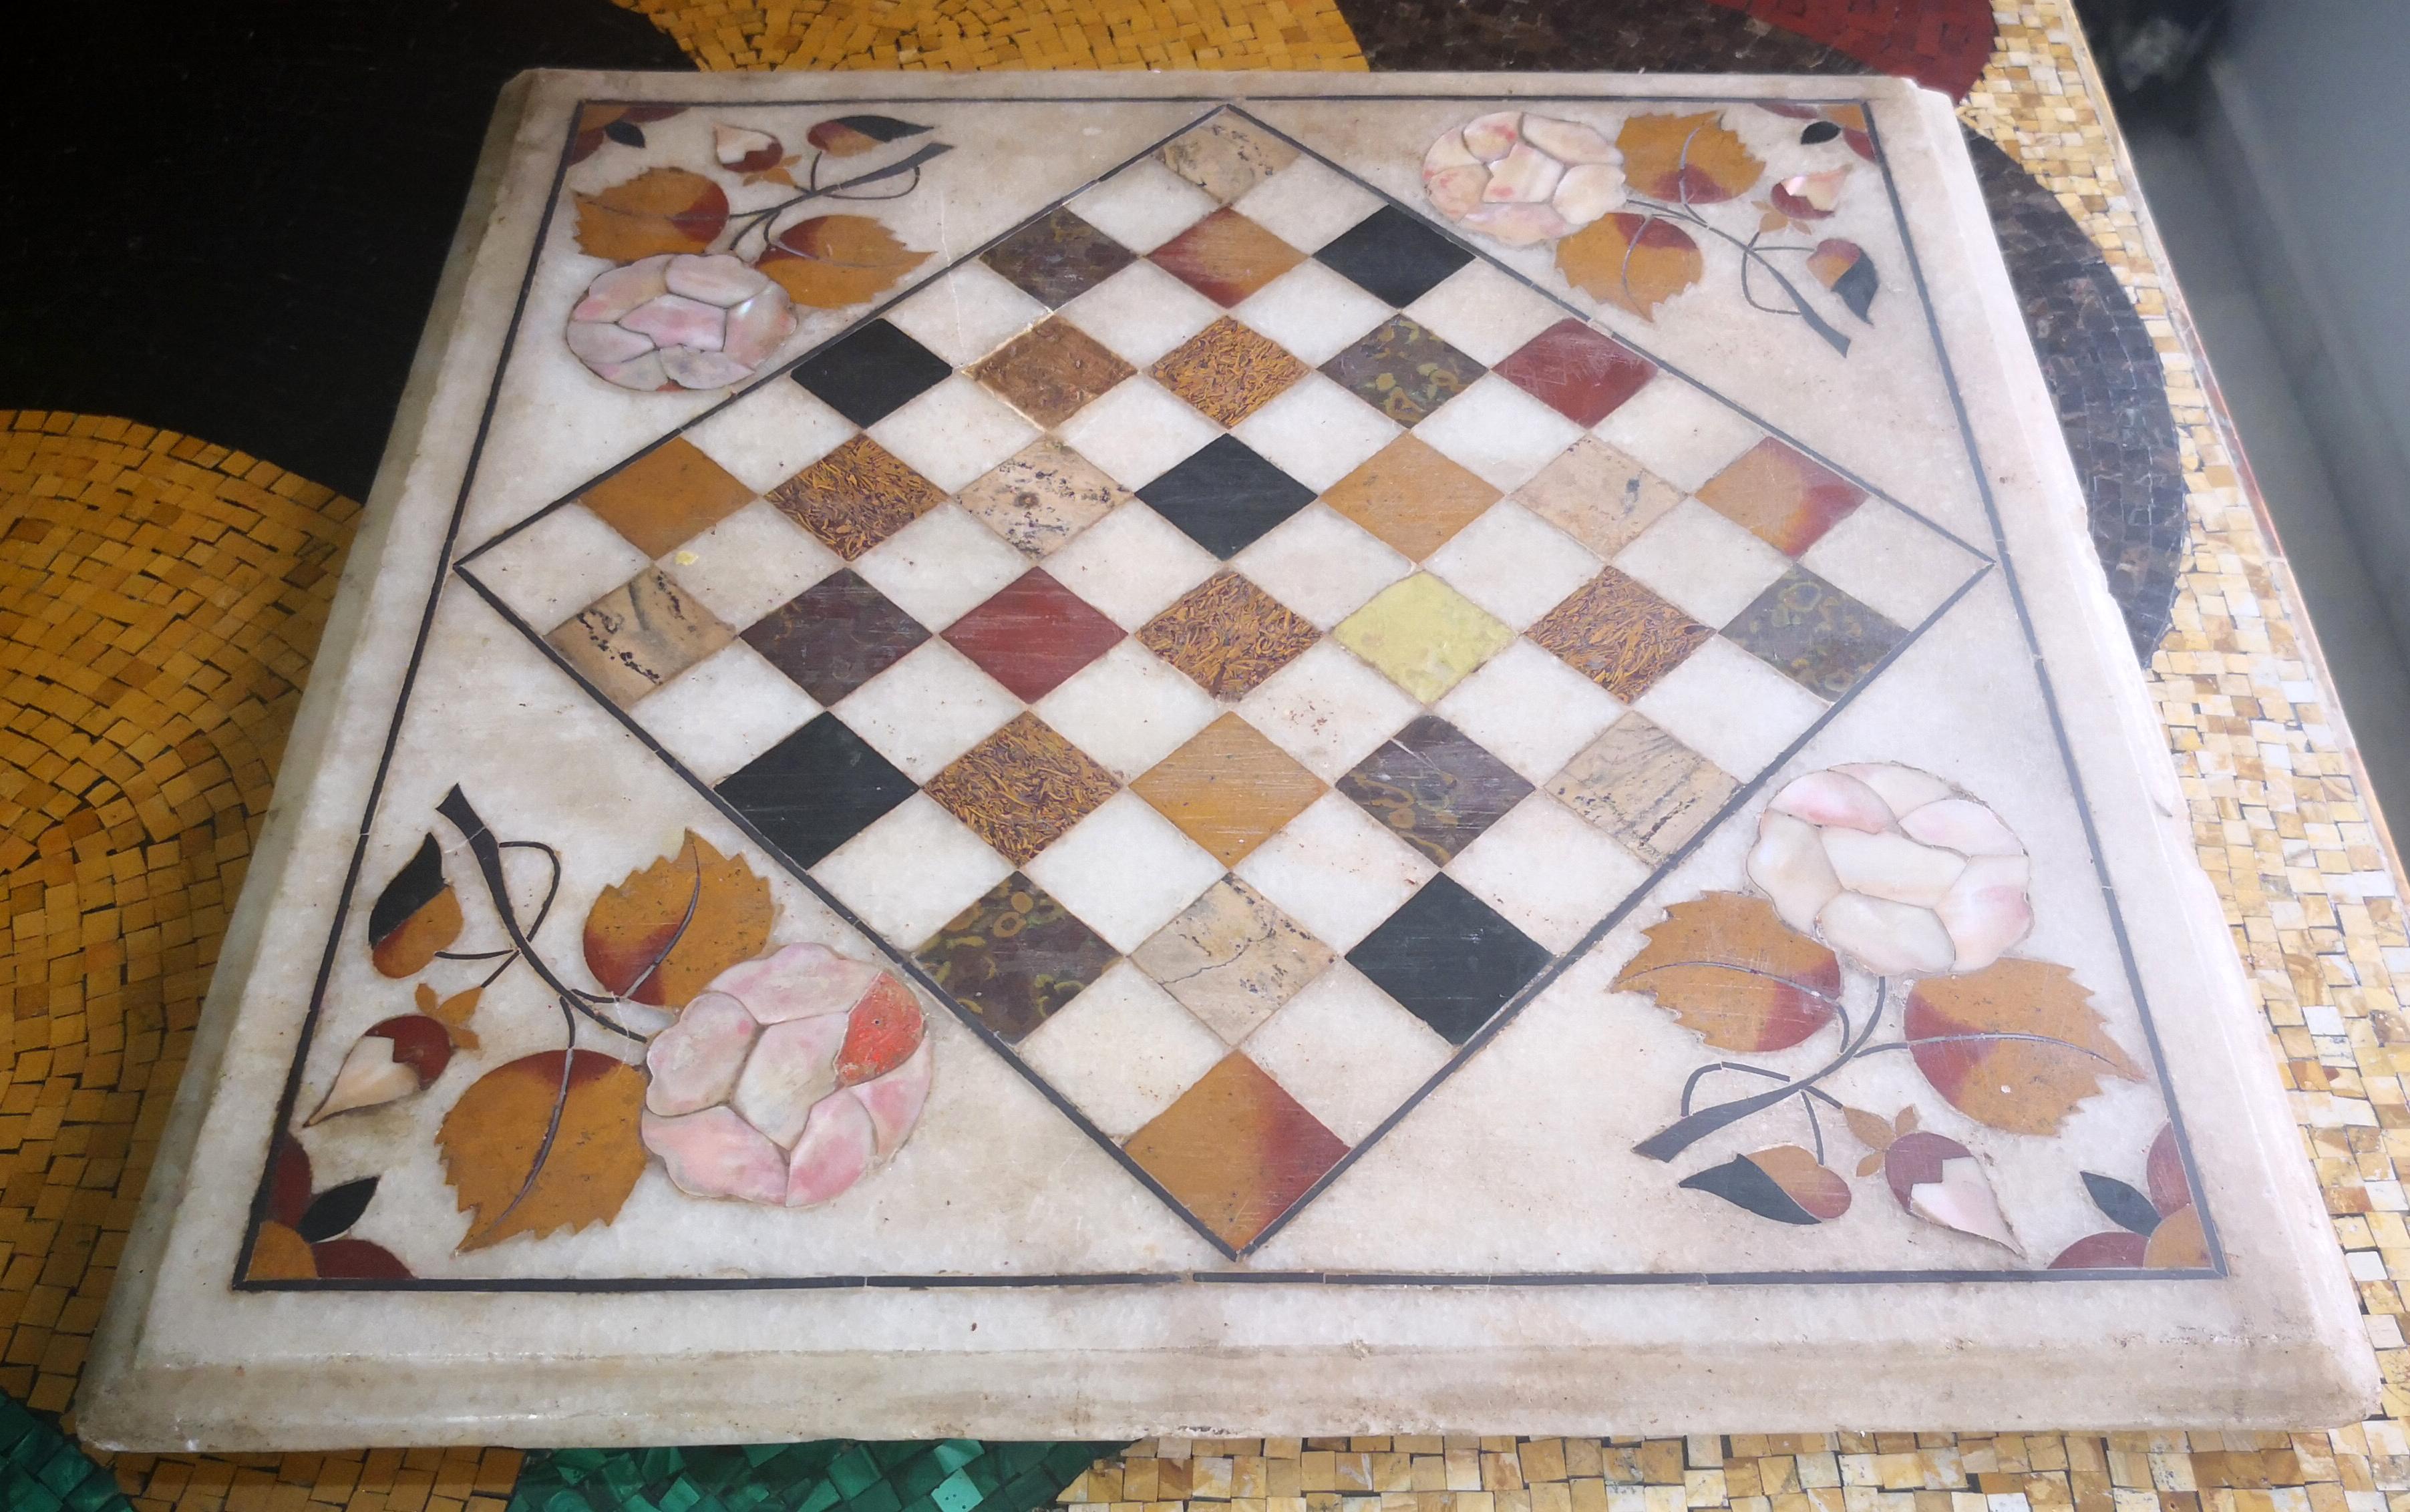 Indian 1950s Hand-Carved Marble Chess Board using Italian Pietre Dure Inlay Mosaic